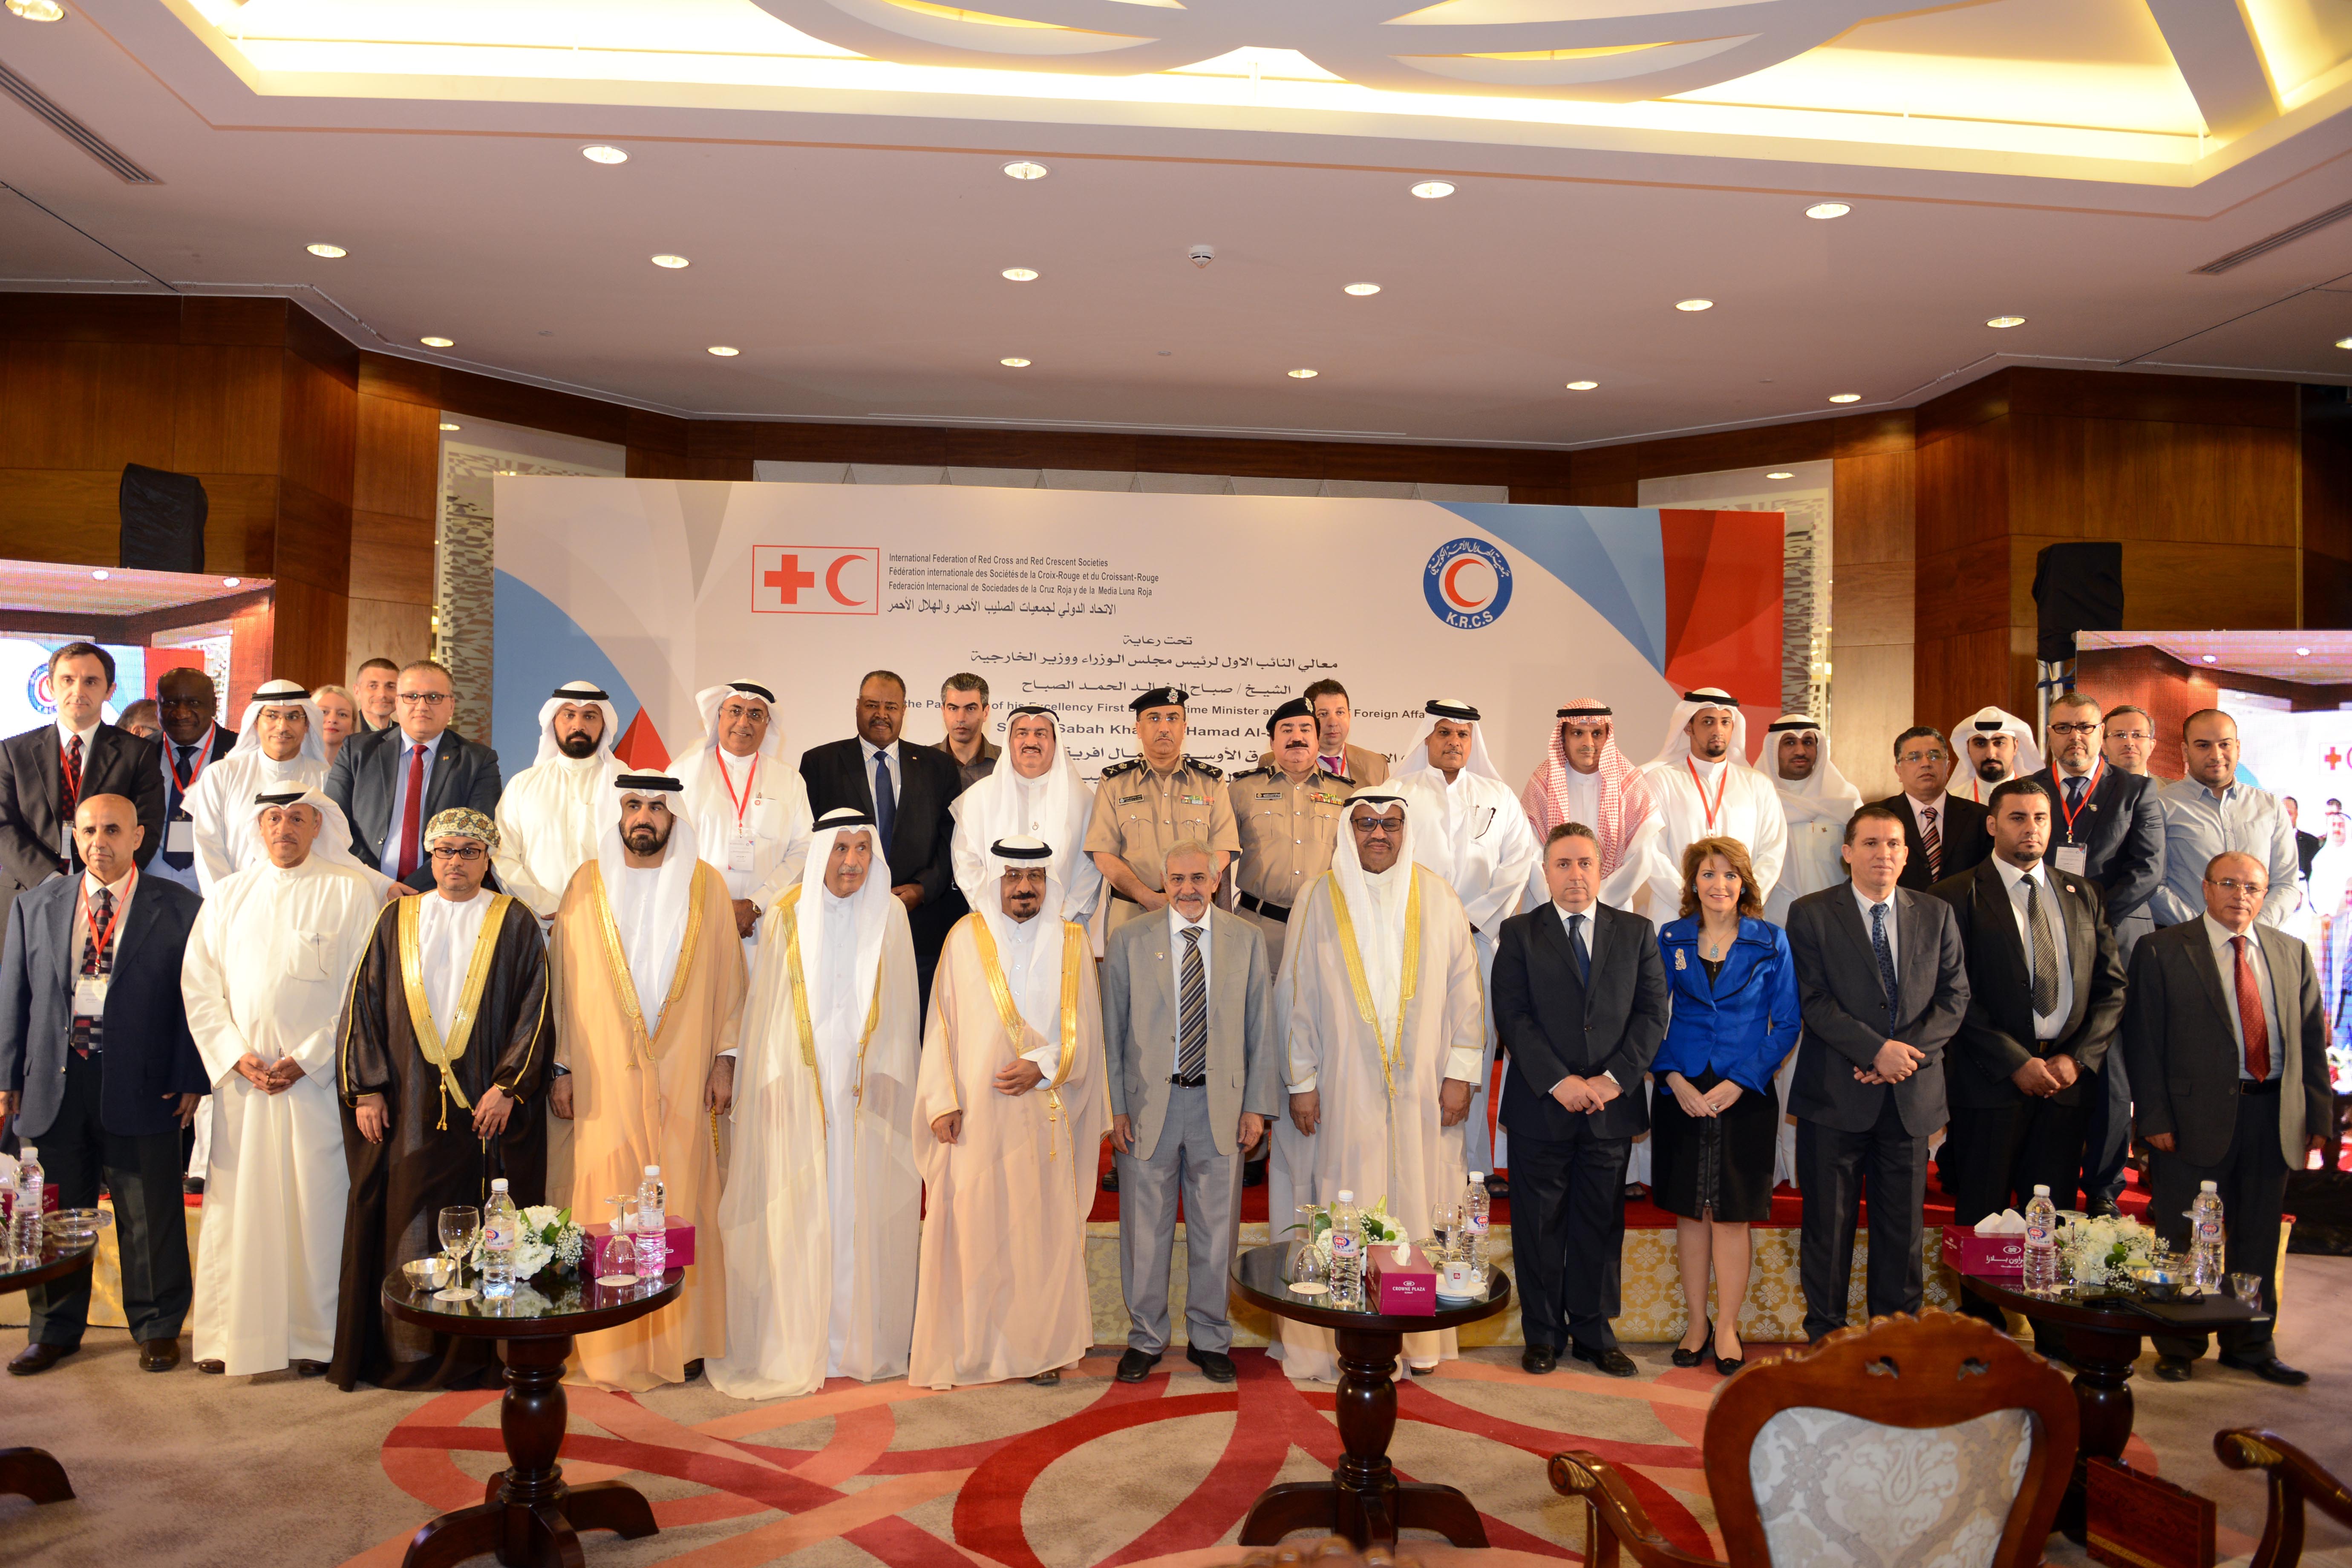 The opening session of Middle East and North Africa consultative meeting on law and disasters